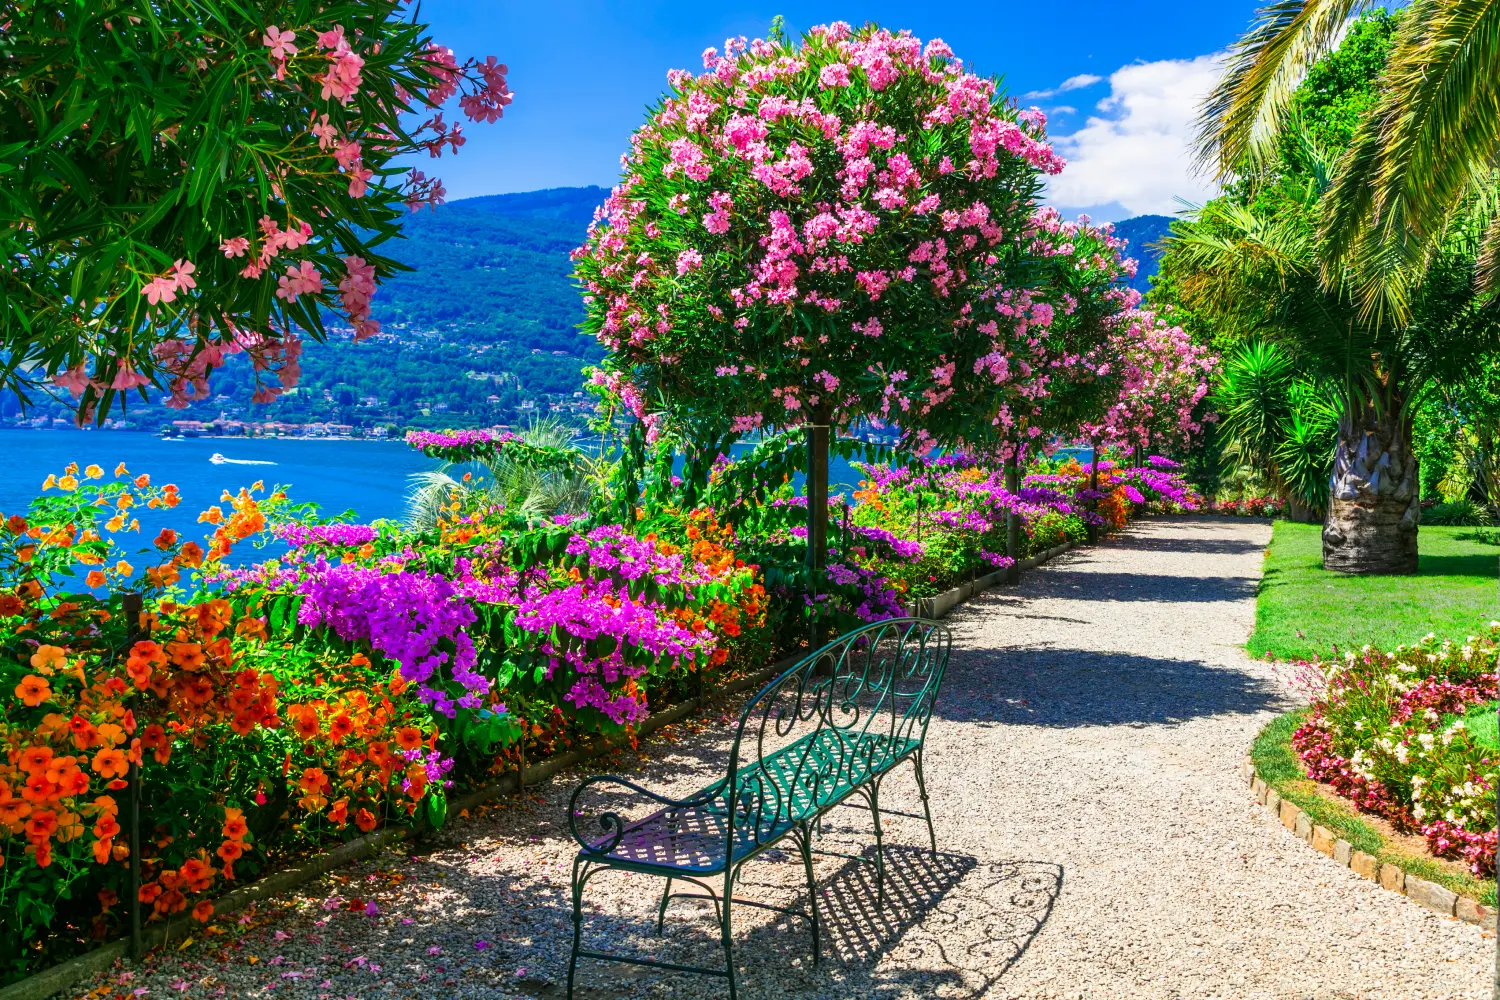 A bench in a colorful botanical garden overlooking at the blue sea